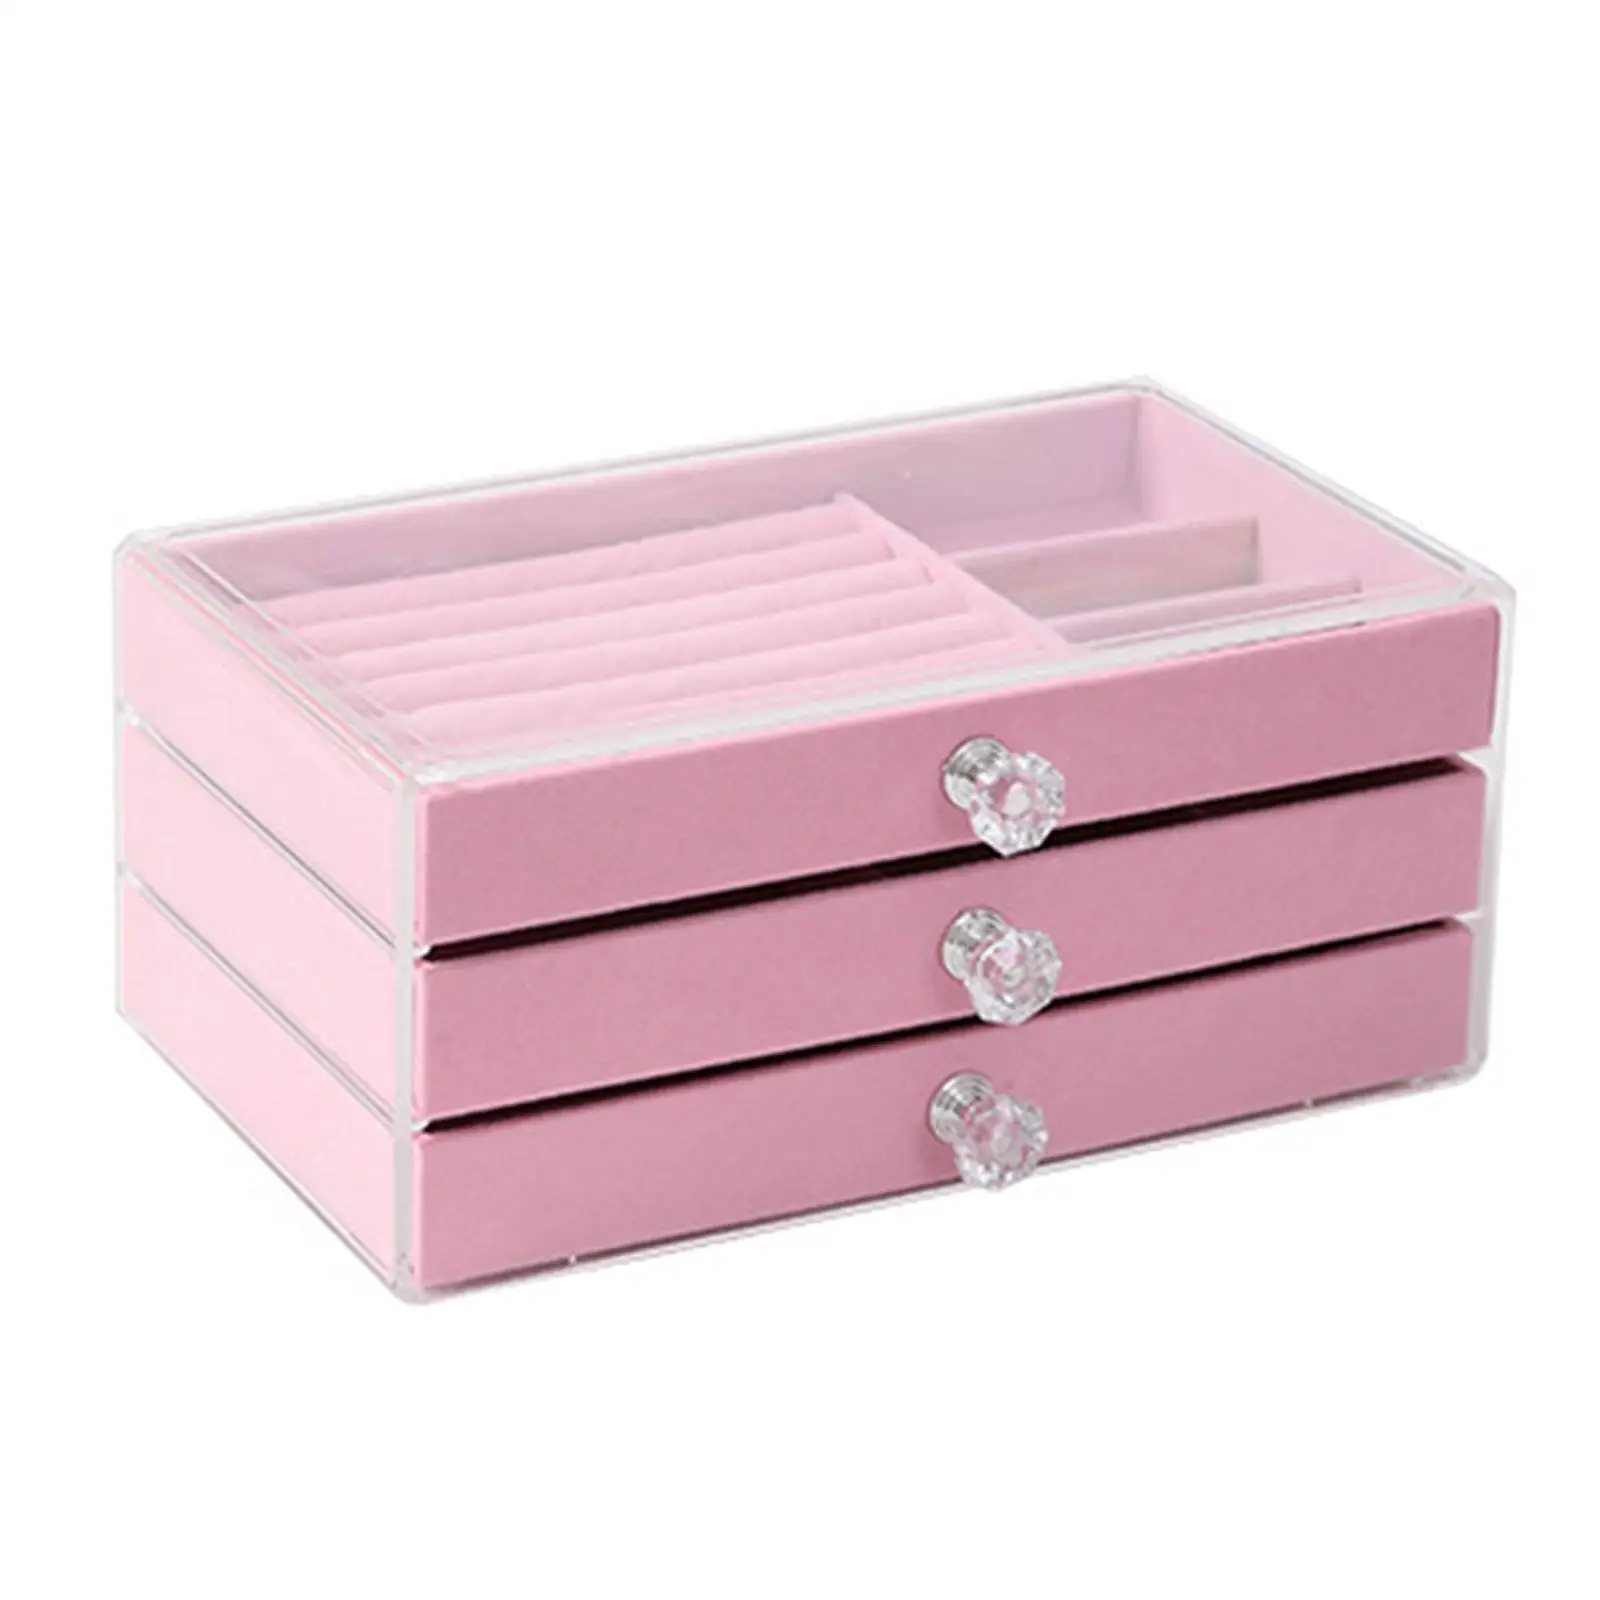 Portable Jewelry Box Large Earrings Rings Acrylic for Necklace Jewelry Storage Box Jewelry Case for Friends, Wife or Mother Gift